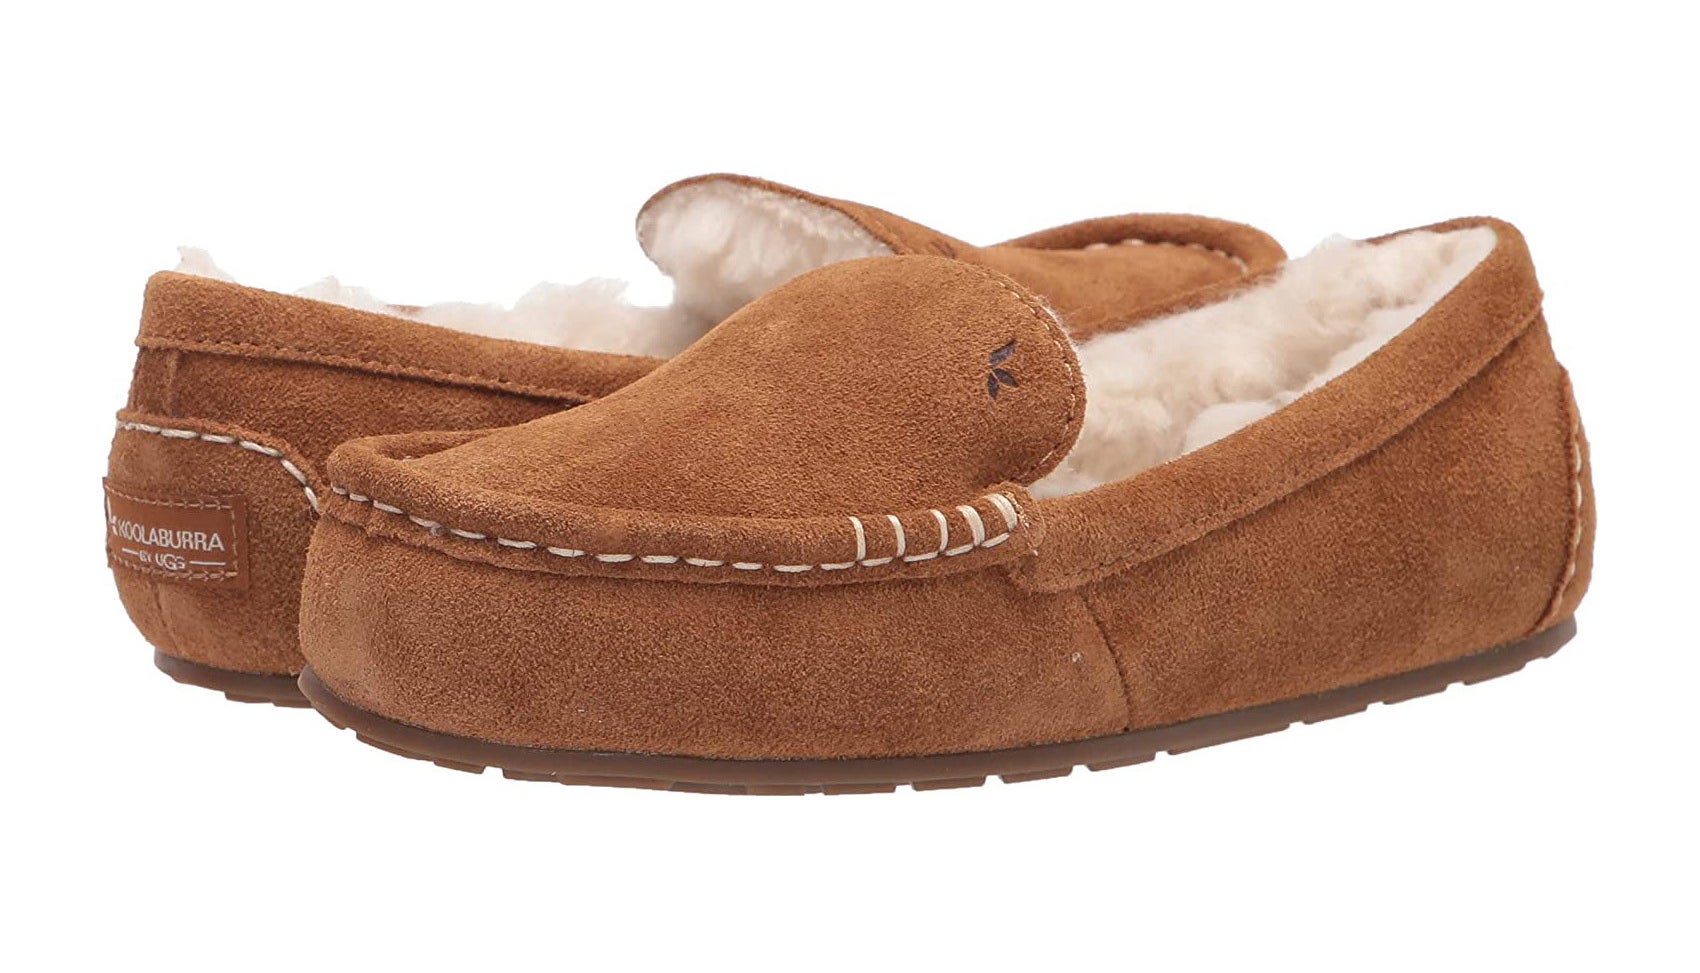 The Koolaburra by Ugg women&#x27;s Lezly slipper in brown with white sheep fur on the inside